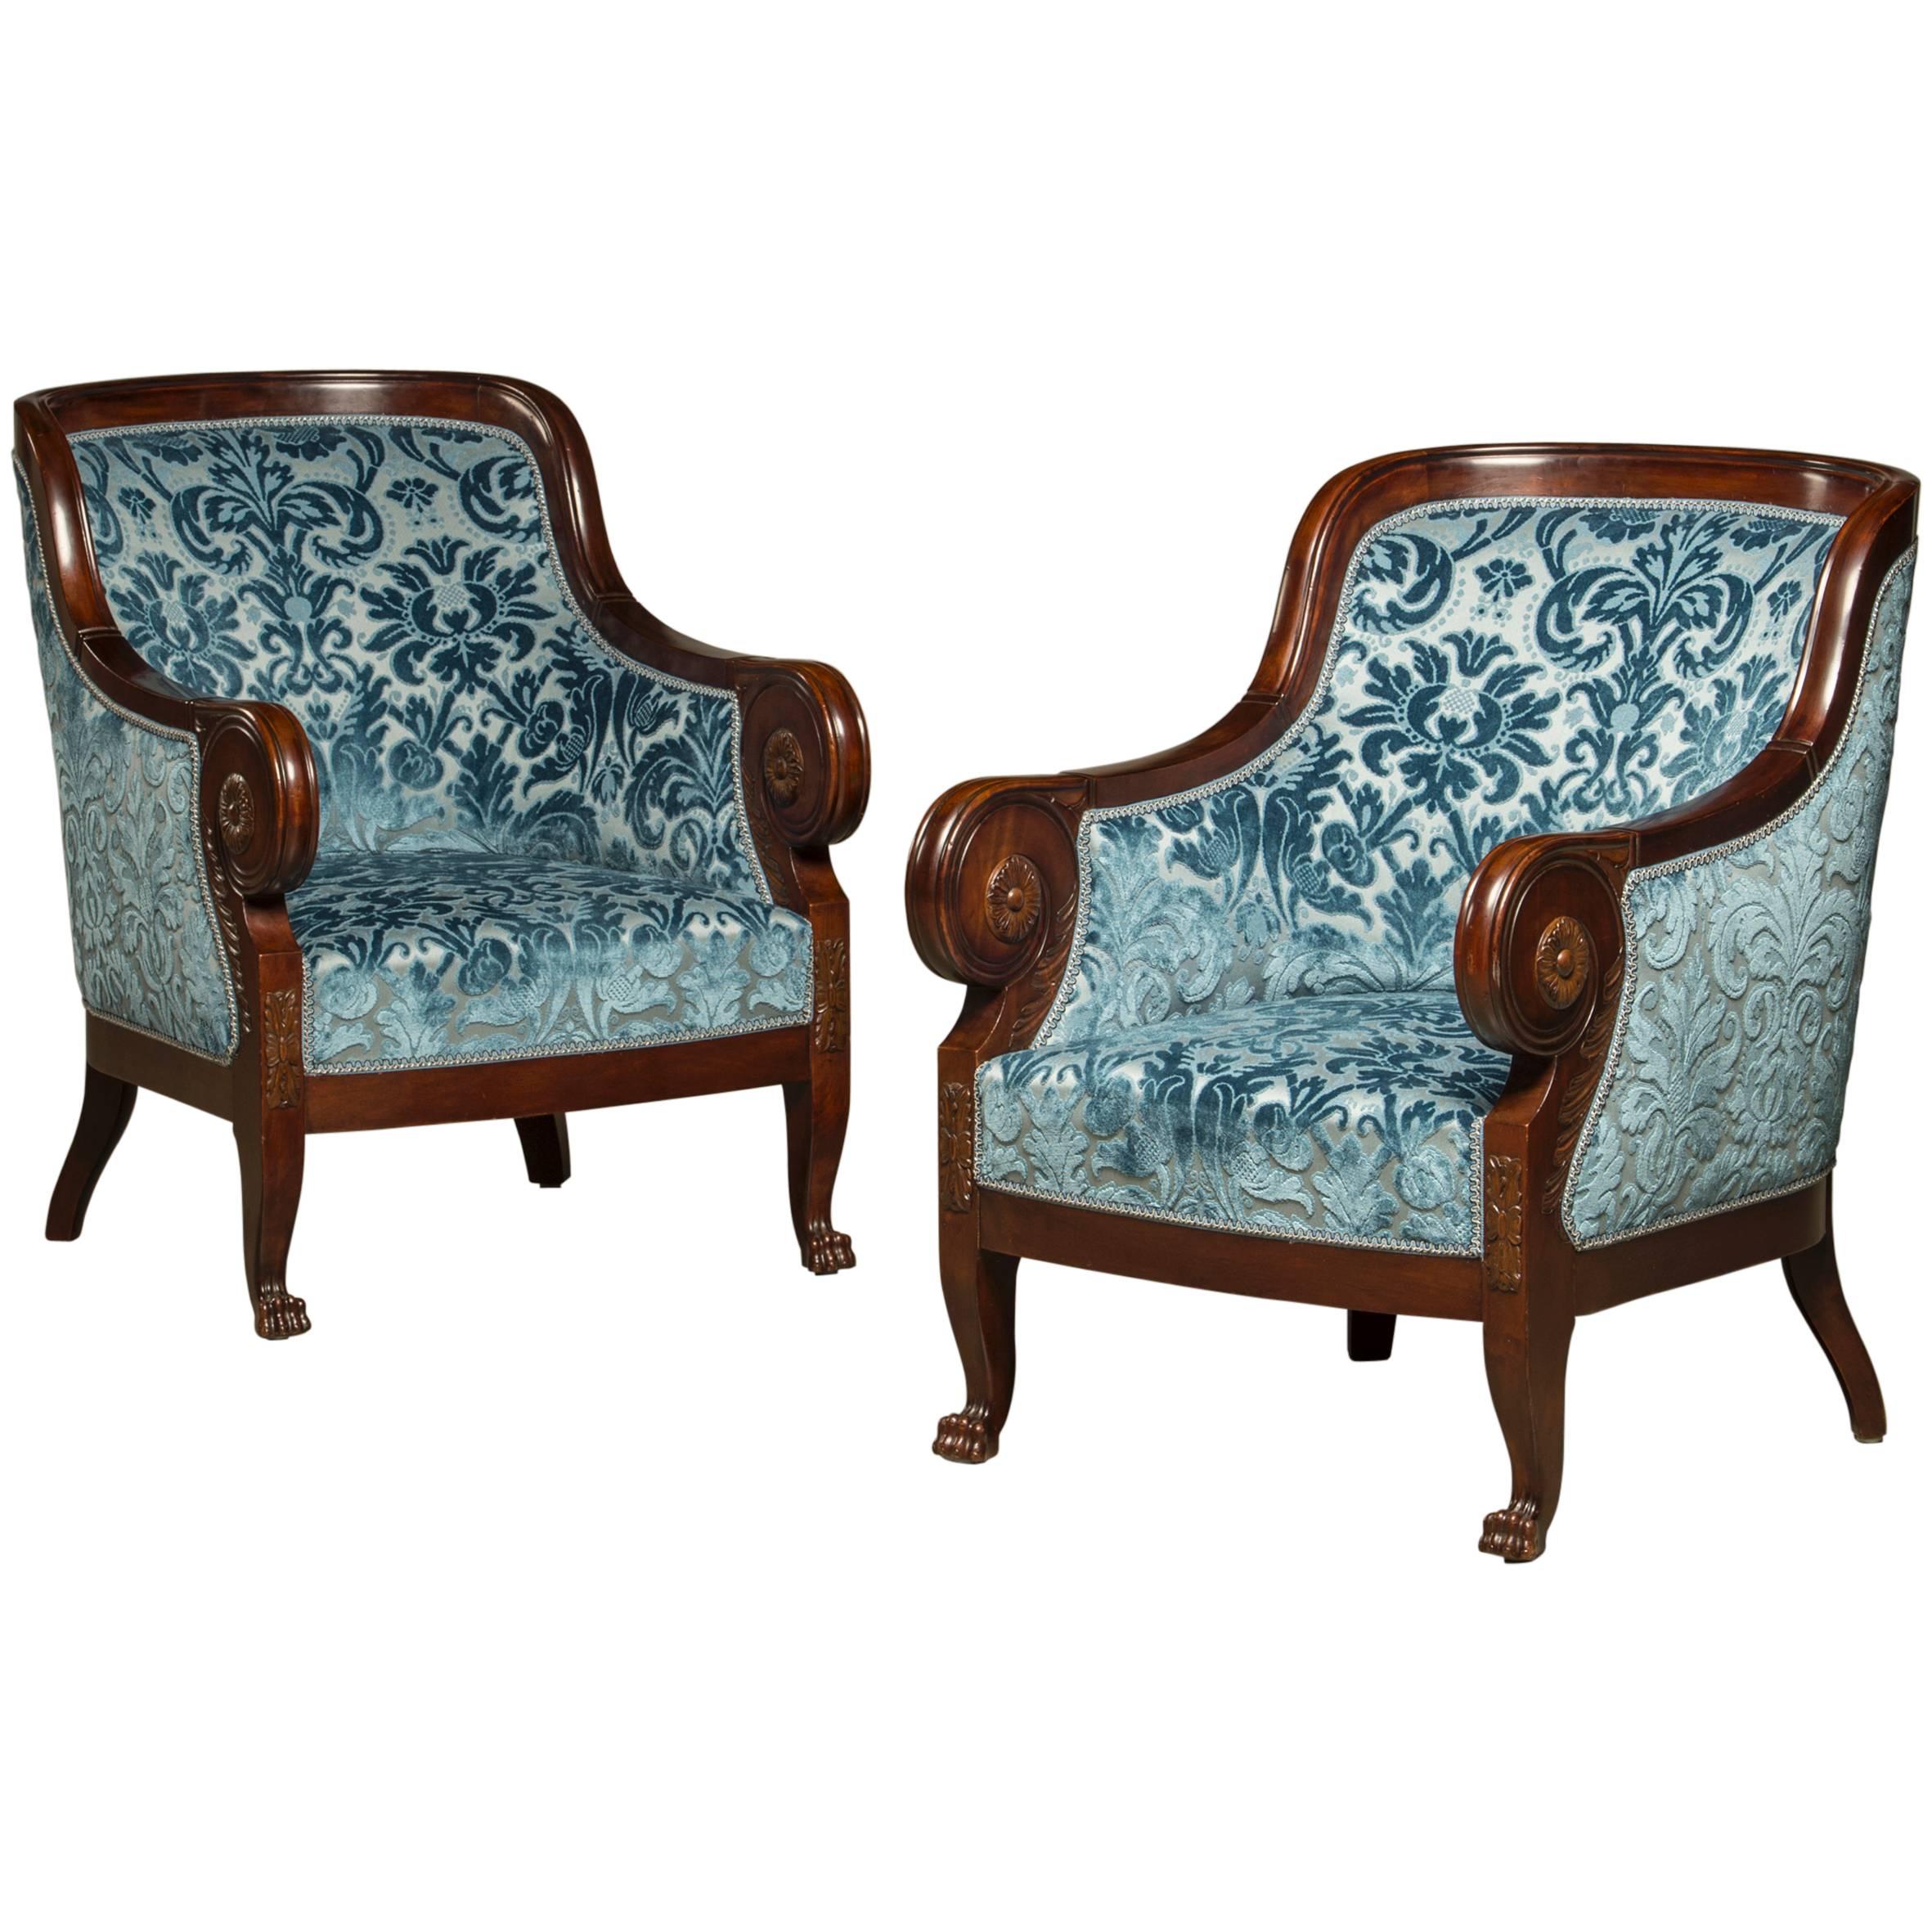 Early 20th Century Pair of Reupholstered Art Deco Bergere Chairs